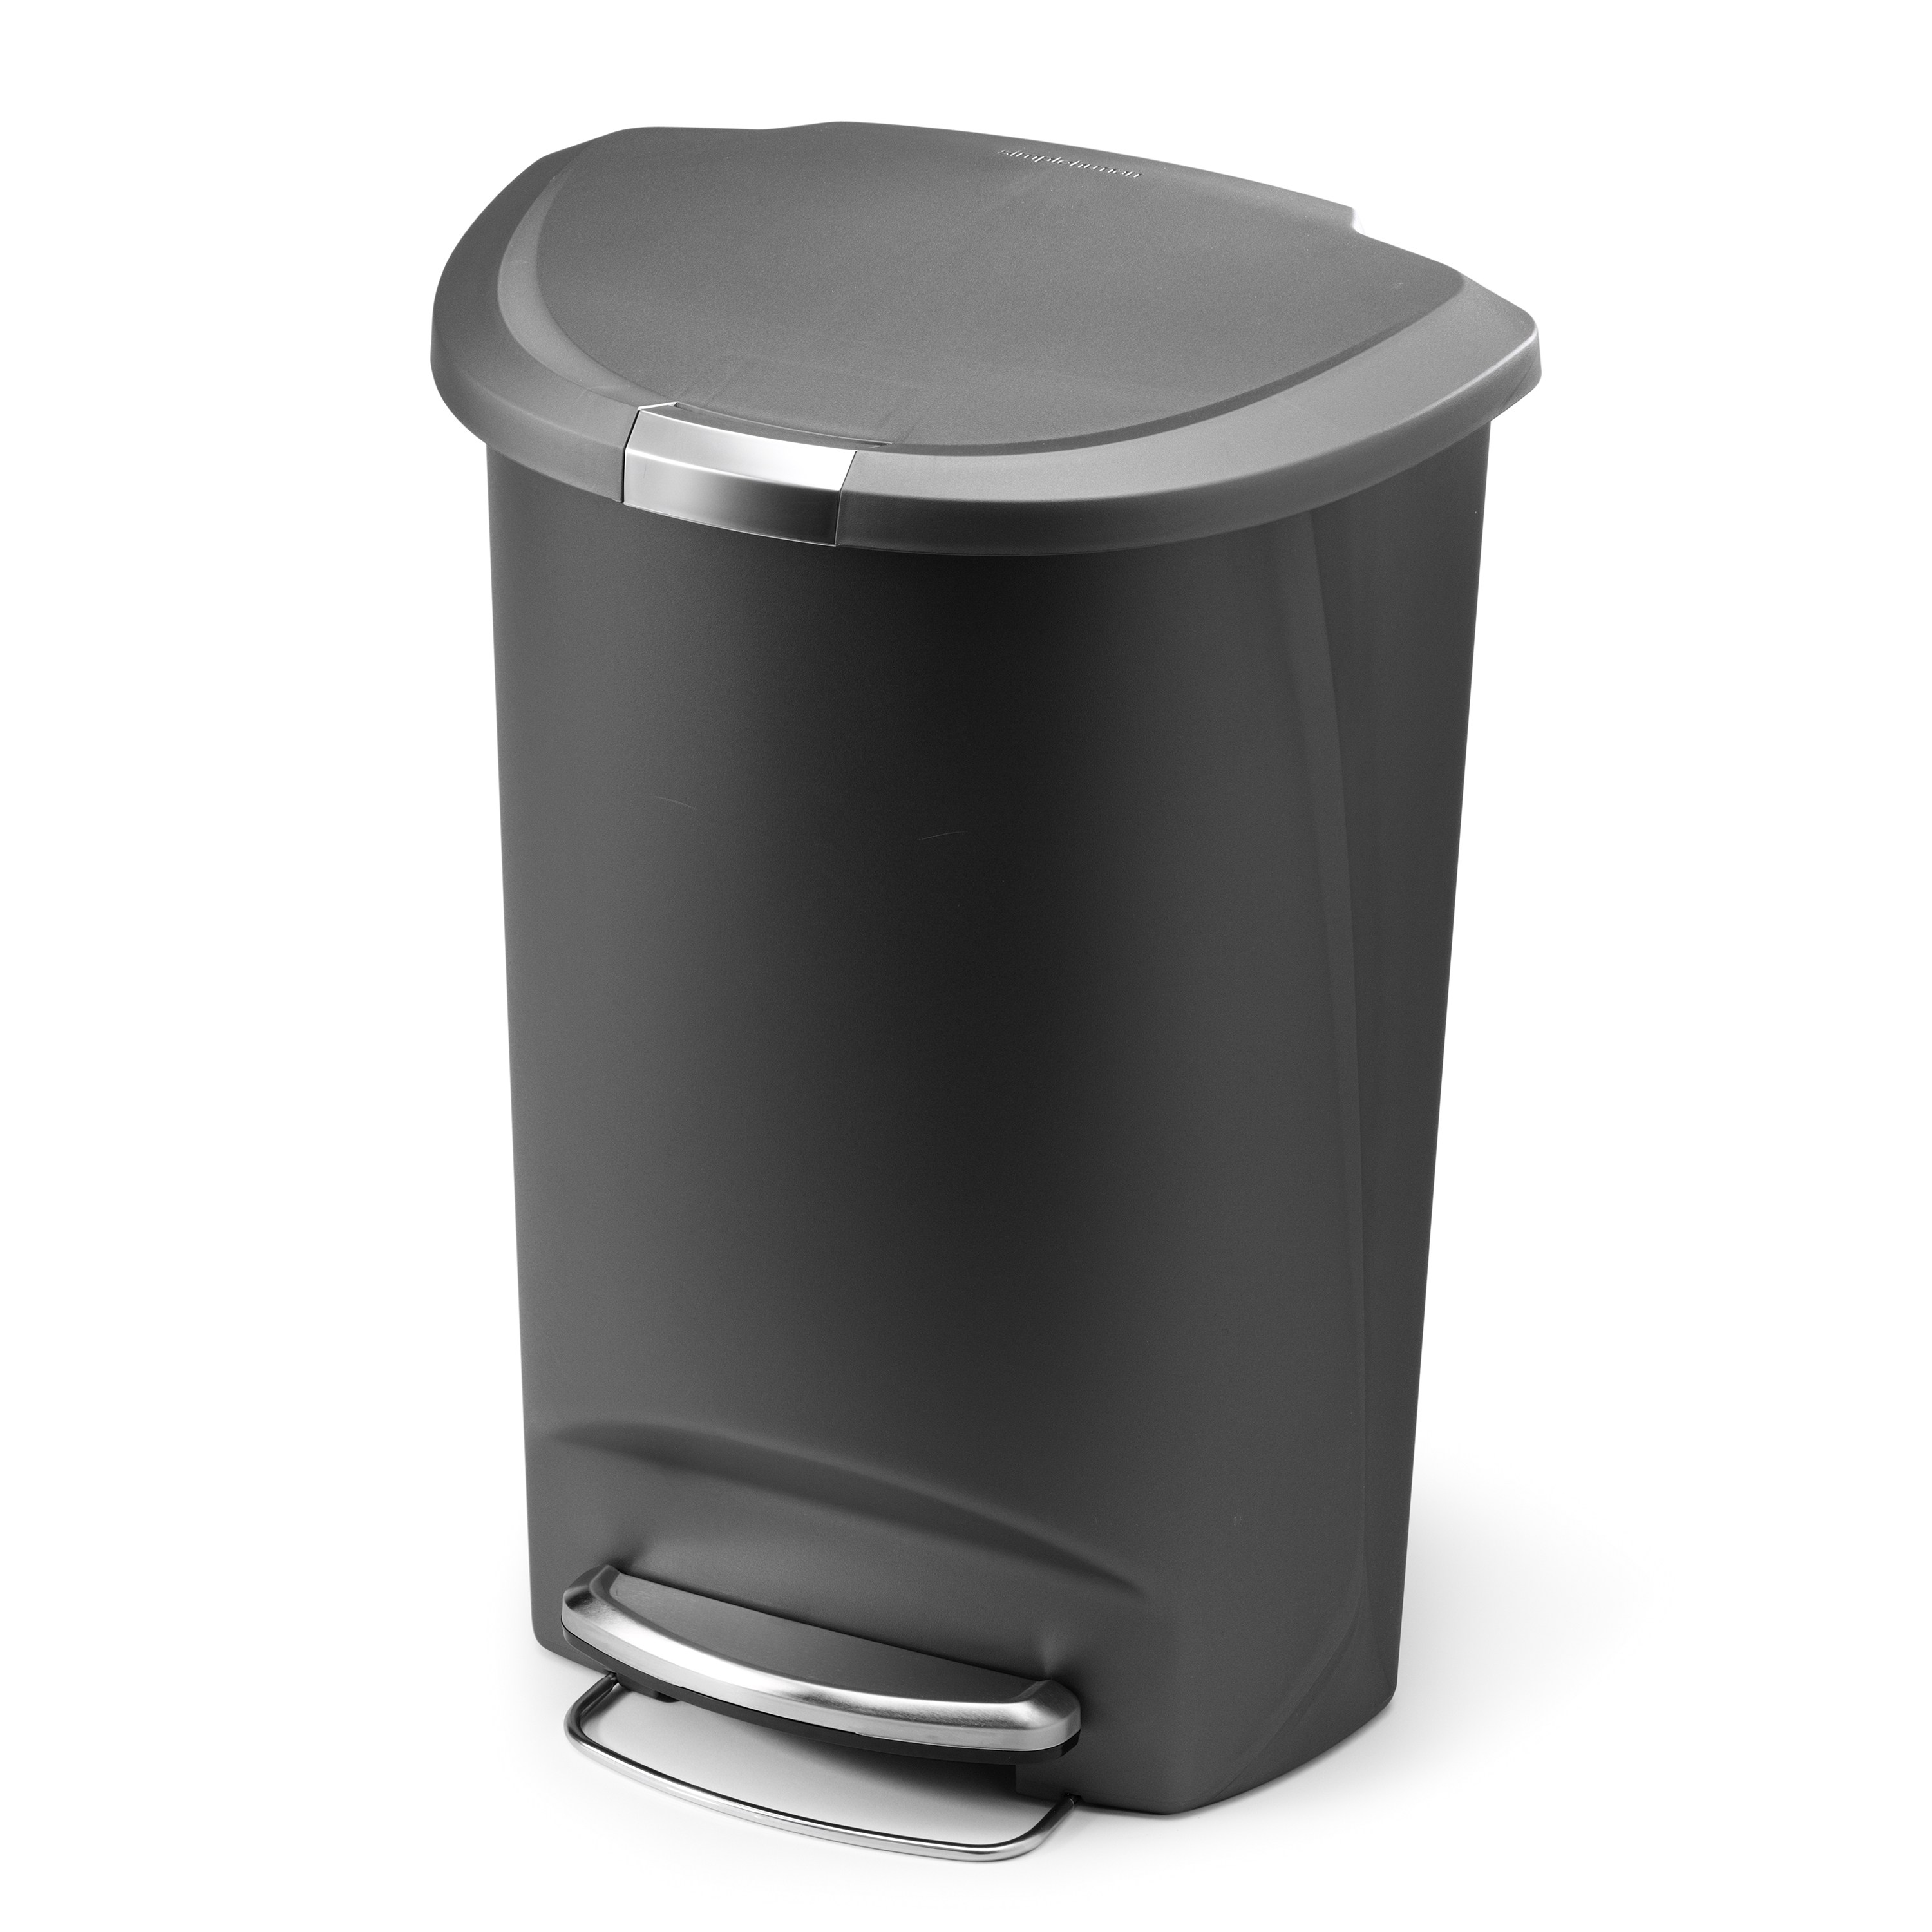 simplehuman 50 Liter 13 Gallon Semi-Round Kitchen Step Trash Can Grey Plastic With Secure Slide Lock